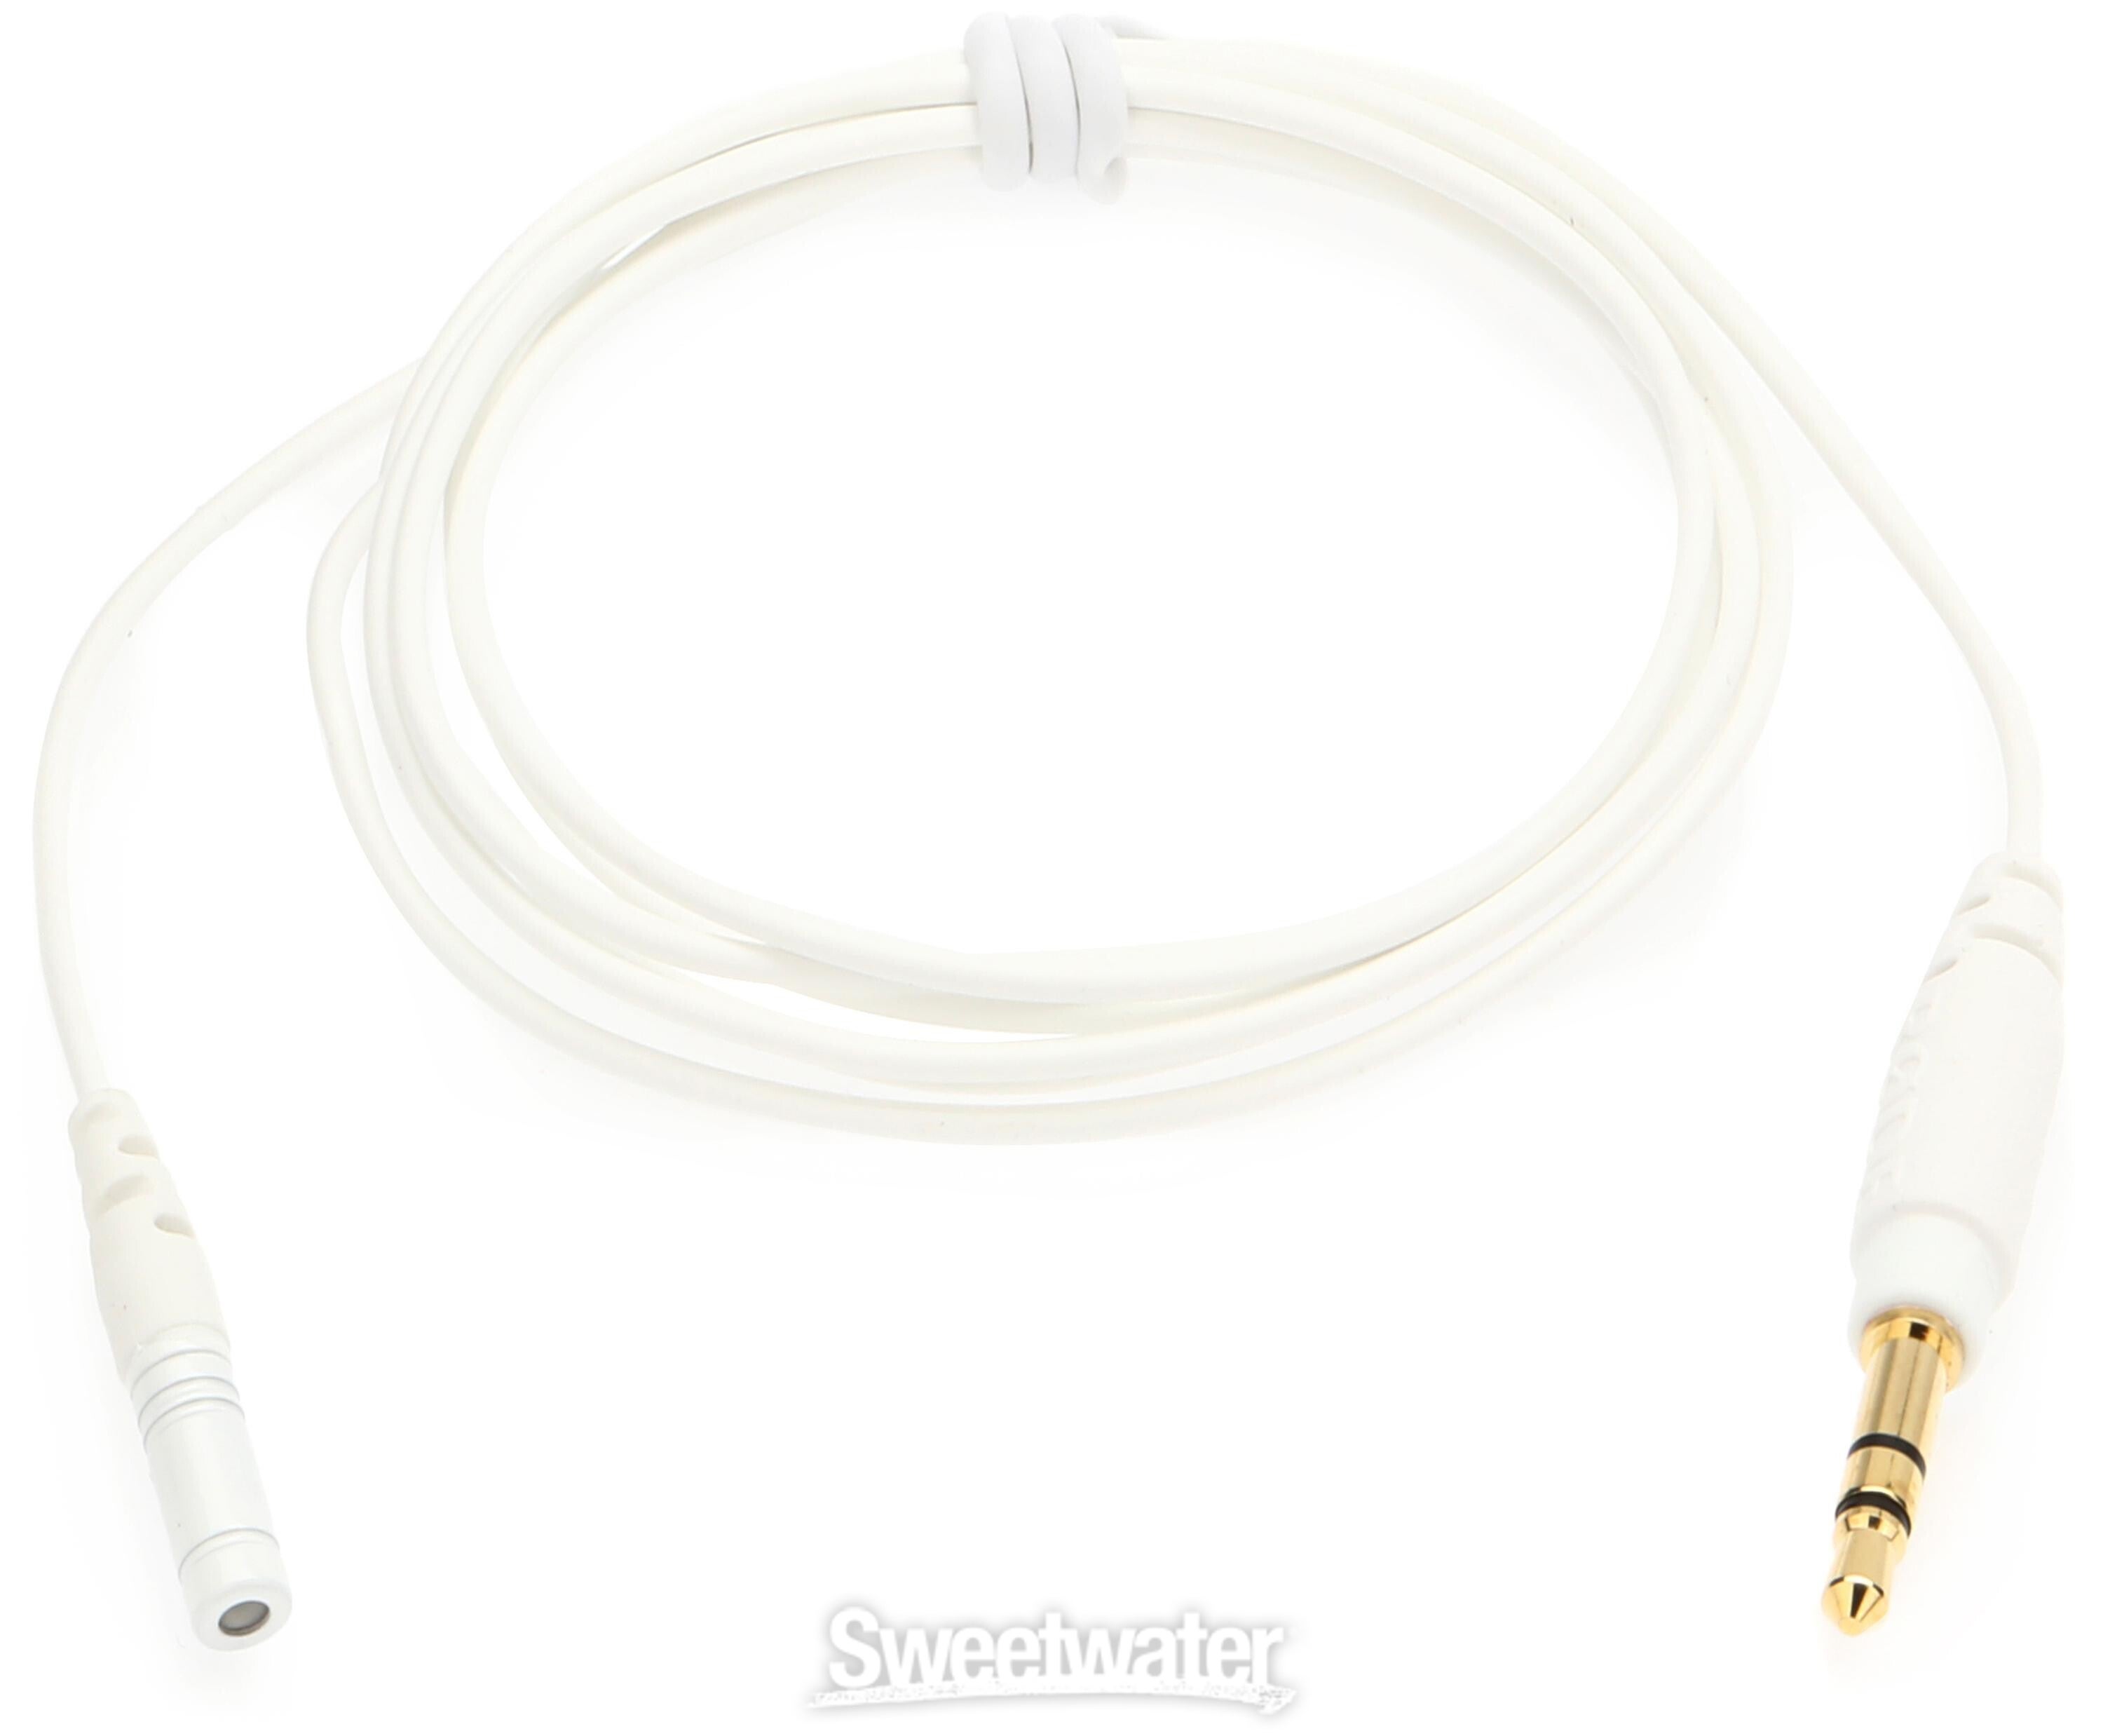 Rode Lavalier GO Professional Wearable Microphone - White | Sweetwater